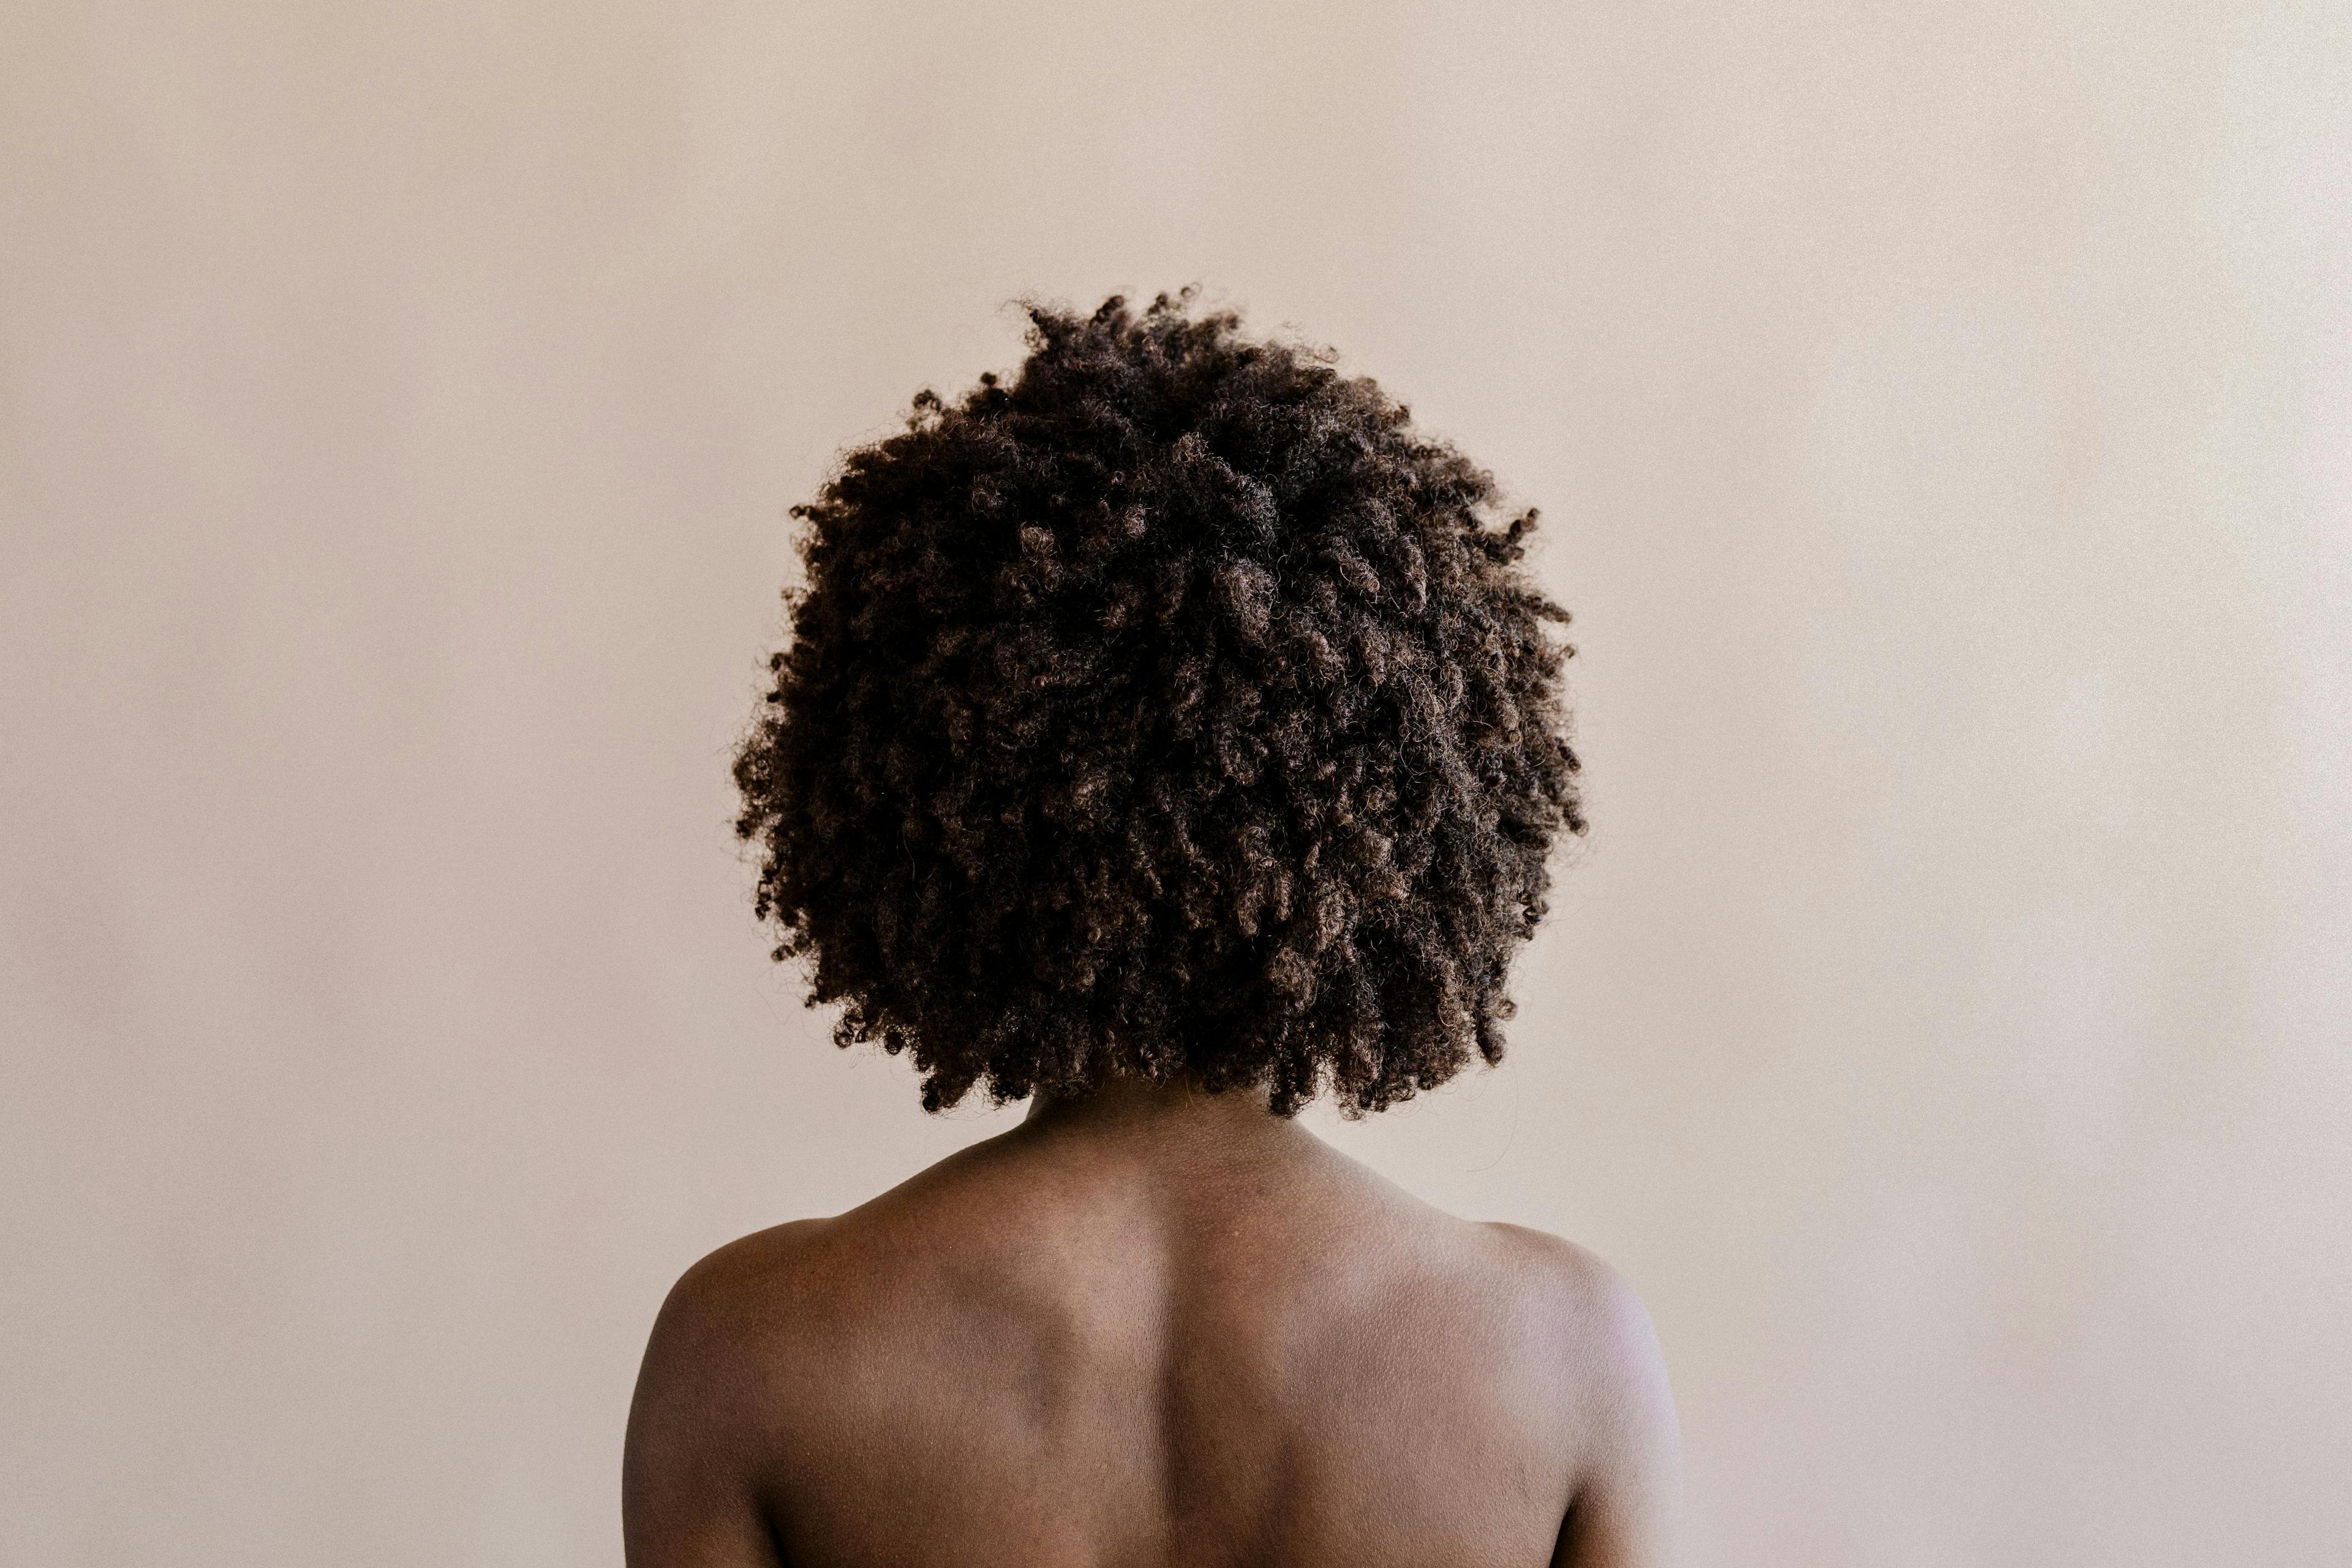 Hair and Skin Publications From Sub-Saharan Africa Are Steadily Increasing, Researchers Report